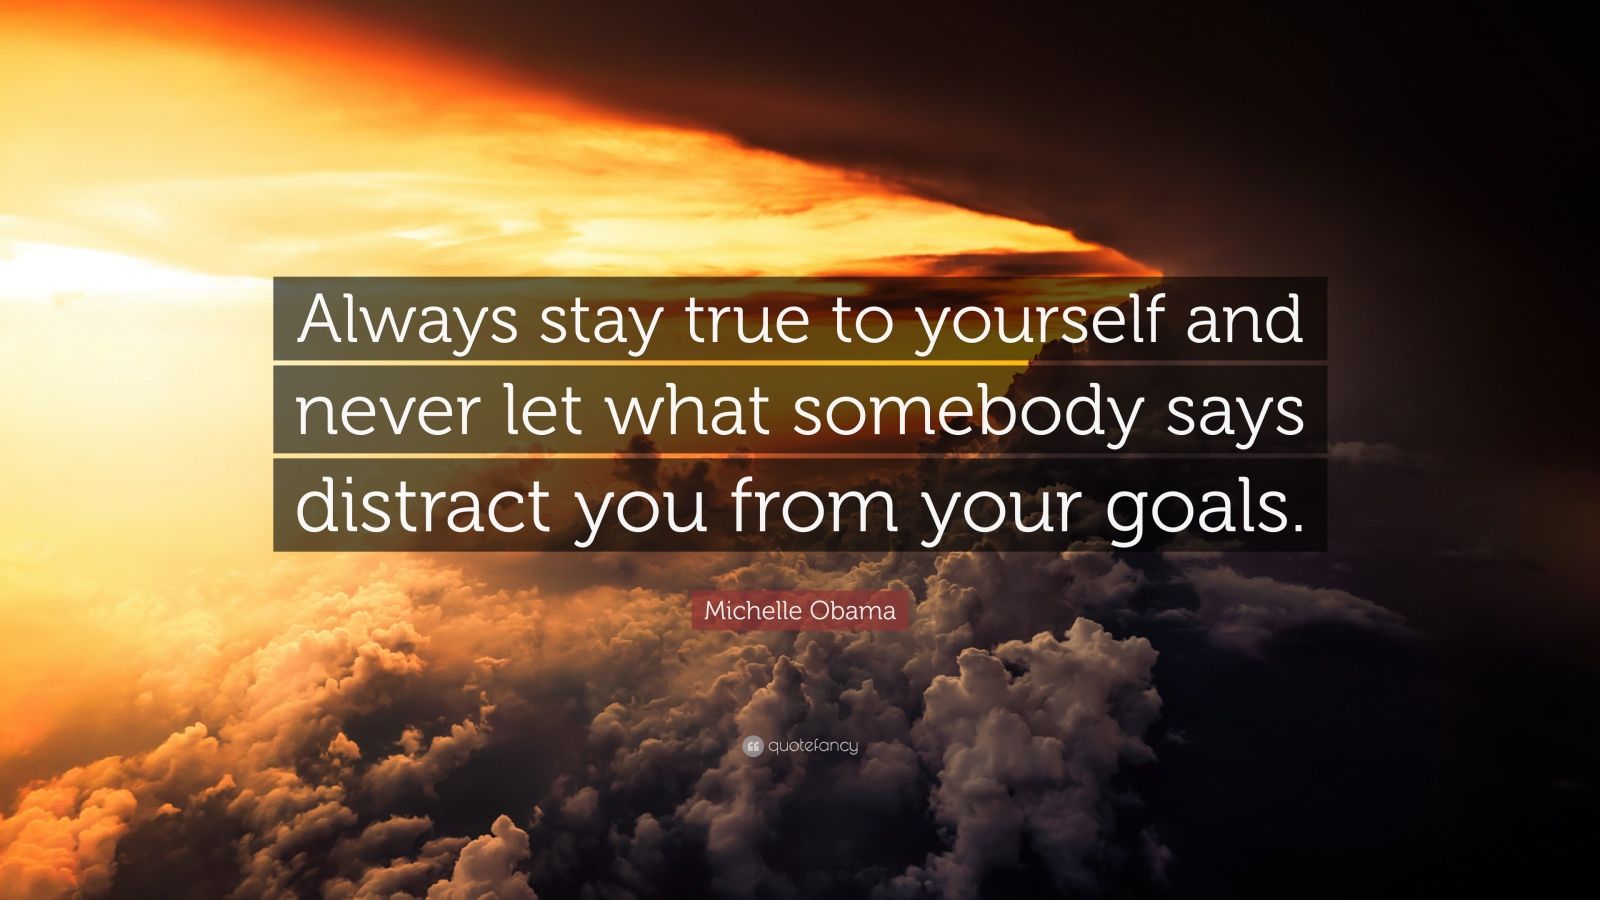 Michelle Obama Quote: “Always stay true to yourself and never let what ...